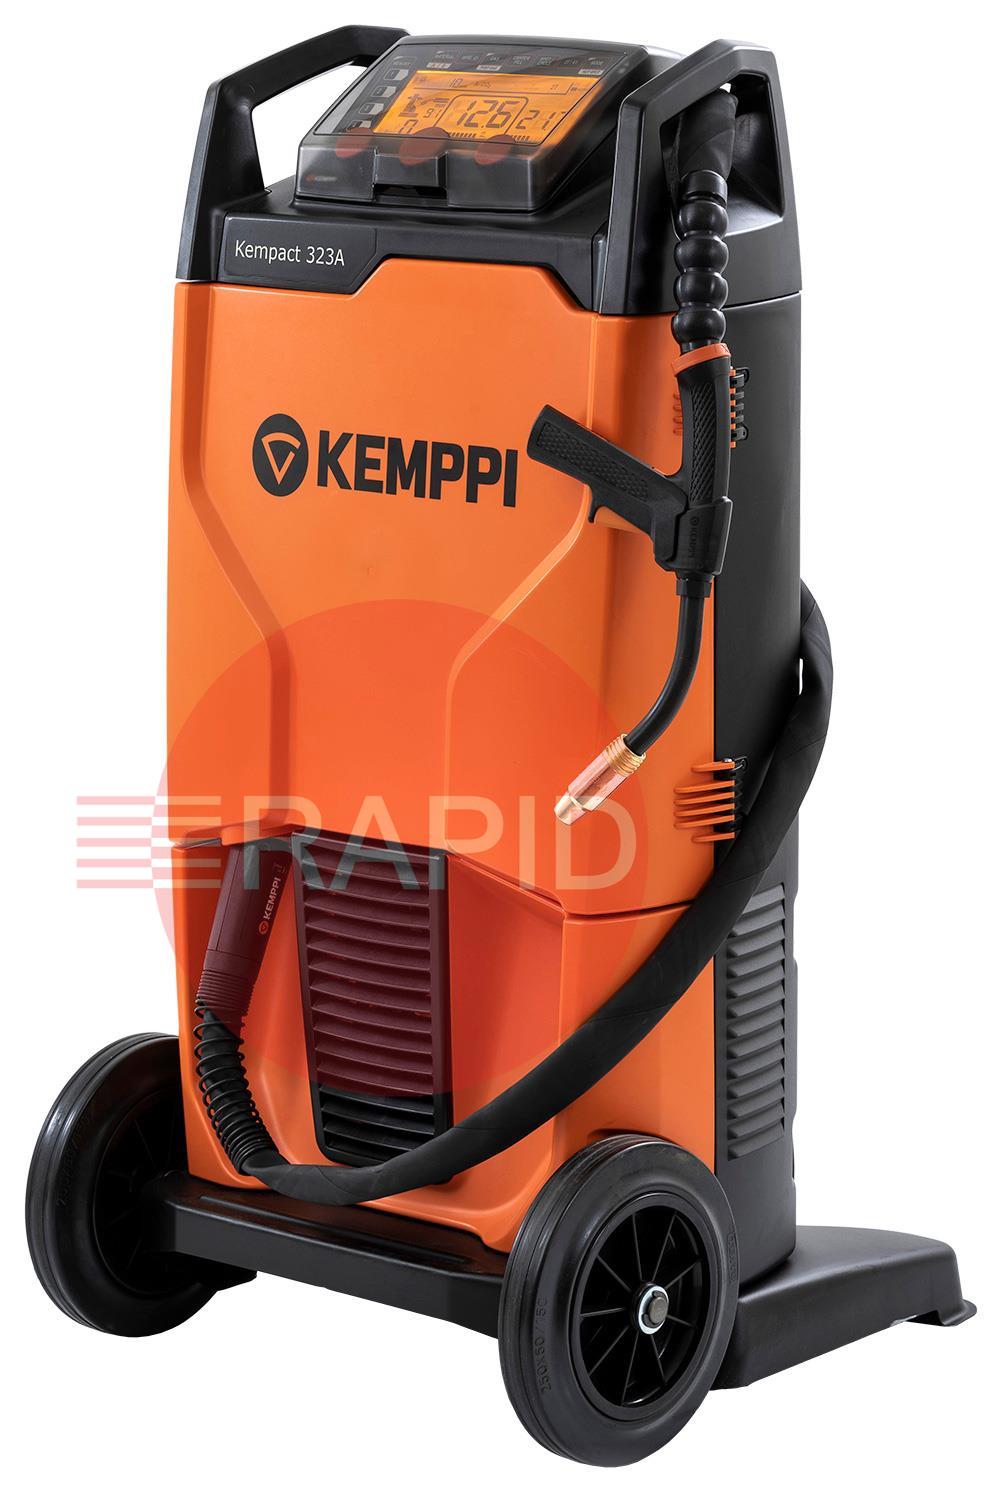 P2231GXE  Kemppi Kempact RA 323A, 320A 3 Phase 400v MIG Welder, with Flexlite GXe 305G 3.5m Torch